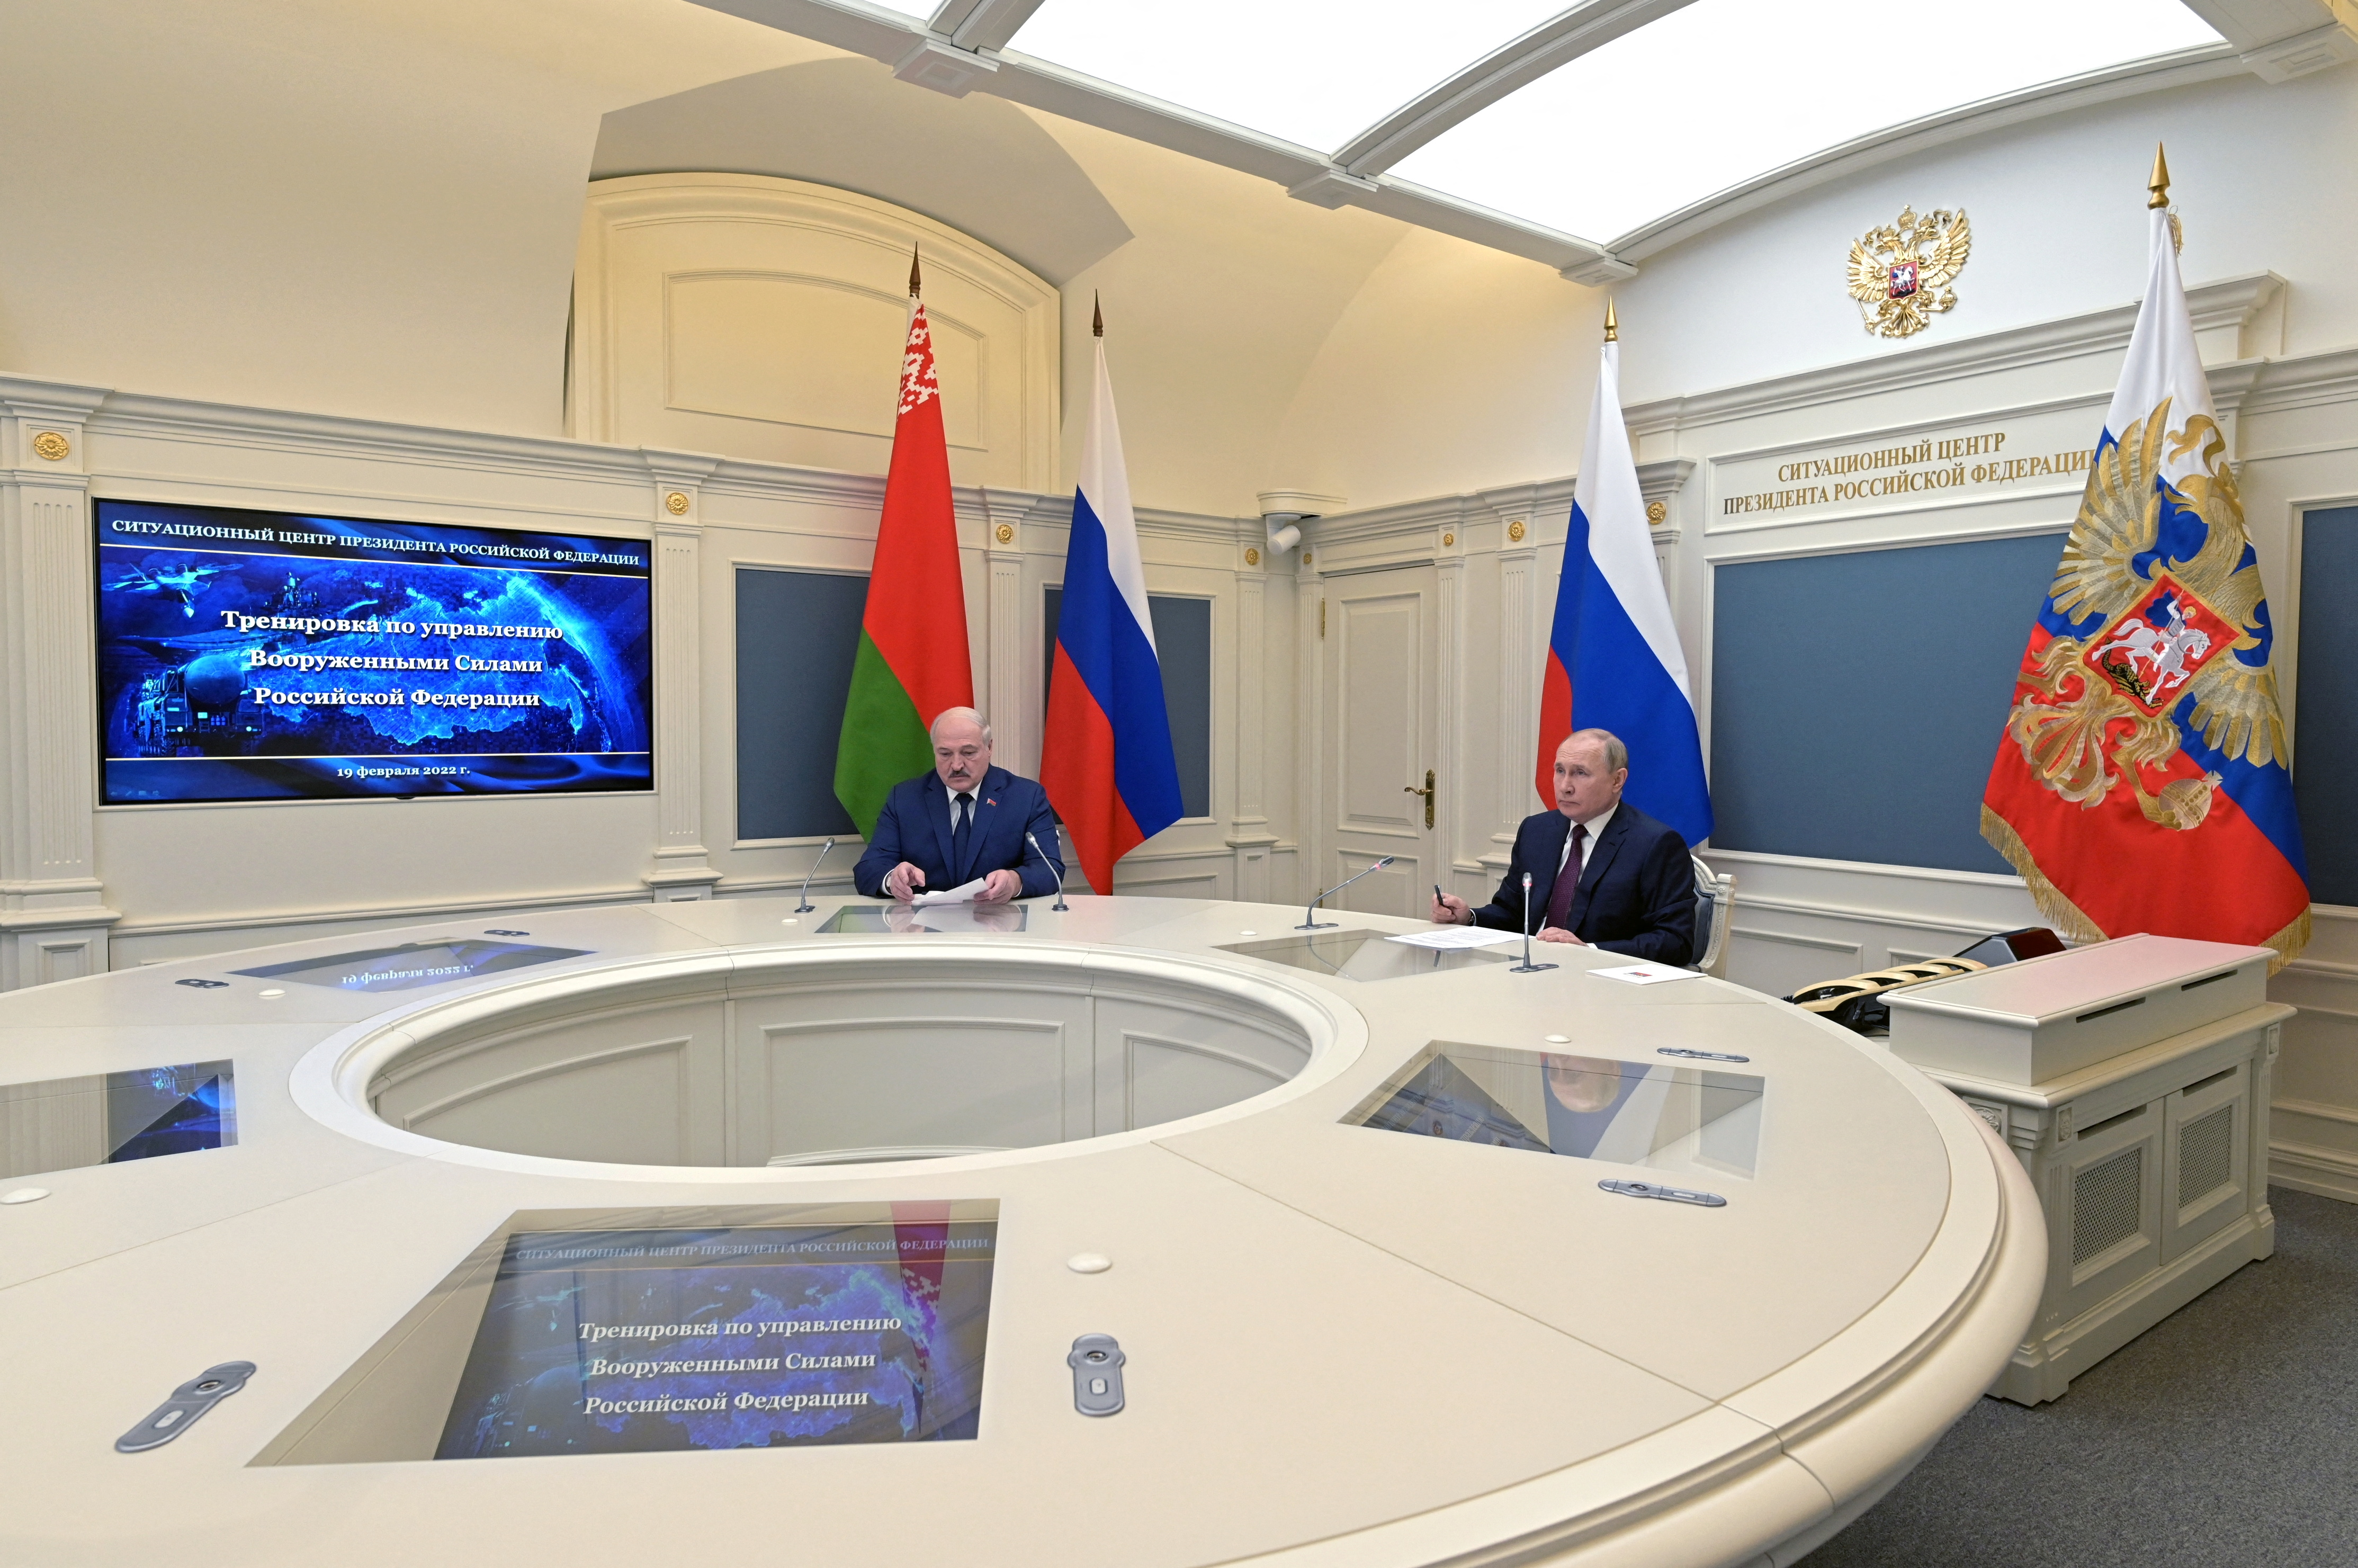 Russian President Vladimir Putin and Belarusian President Alexander Lukashenko observe training launches of ballistic missiles as part of the exercise of the strategic deterrence force, in Moscow, Russia February 19, 2022. Sputnik/Aleksey Nikolskyi/Kremlin via REUTERS 